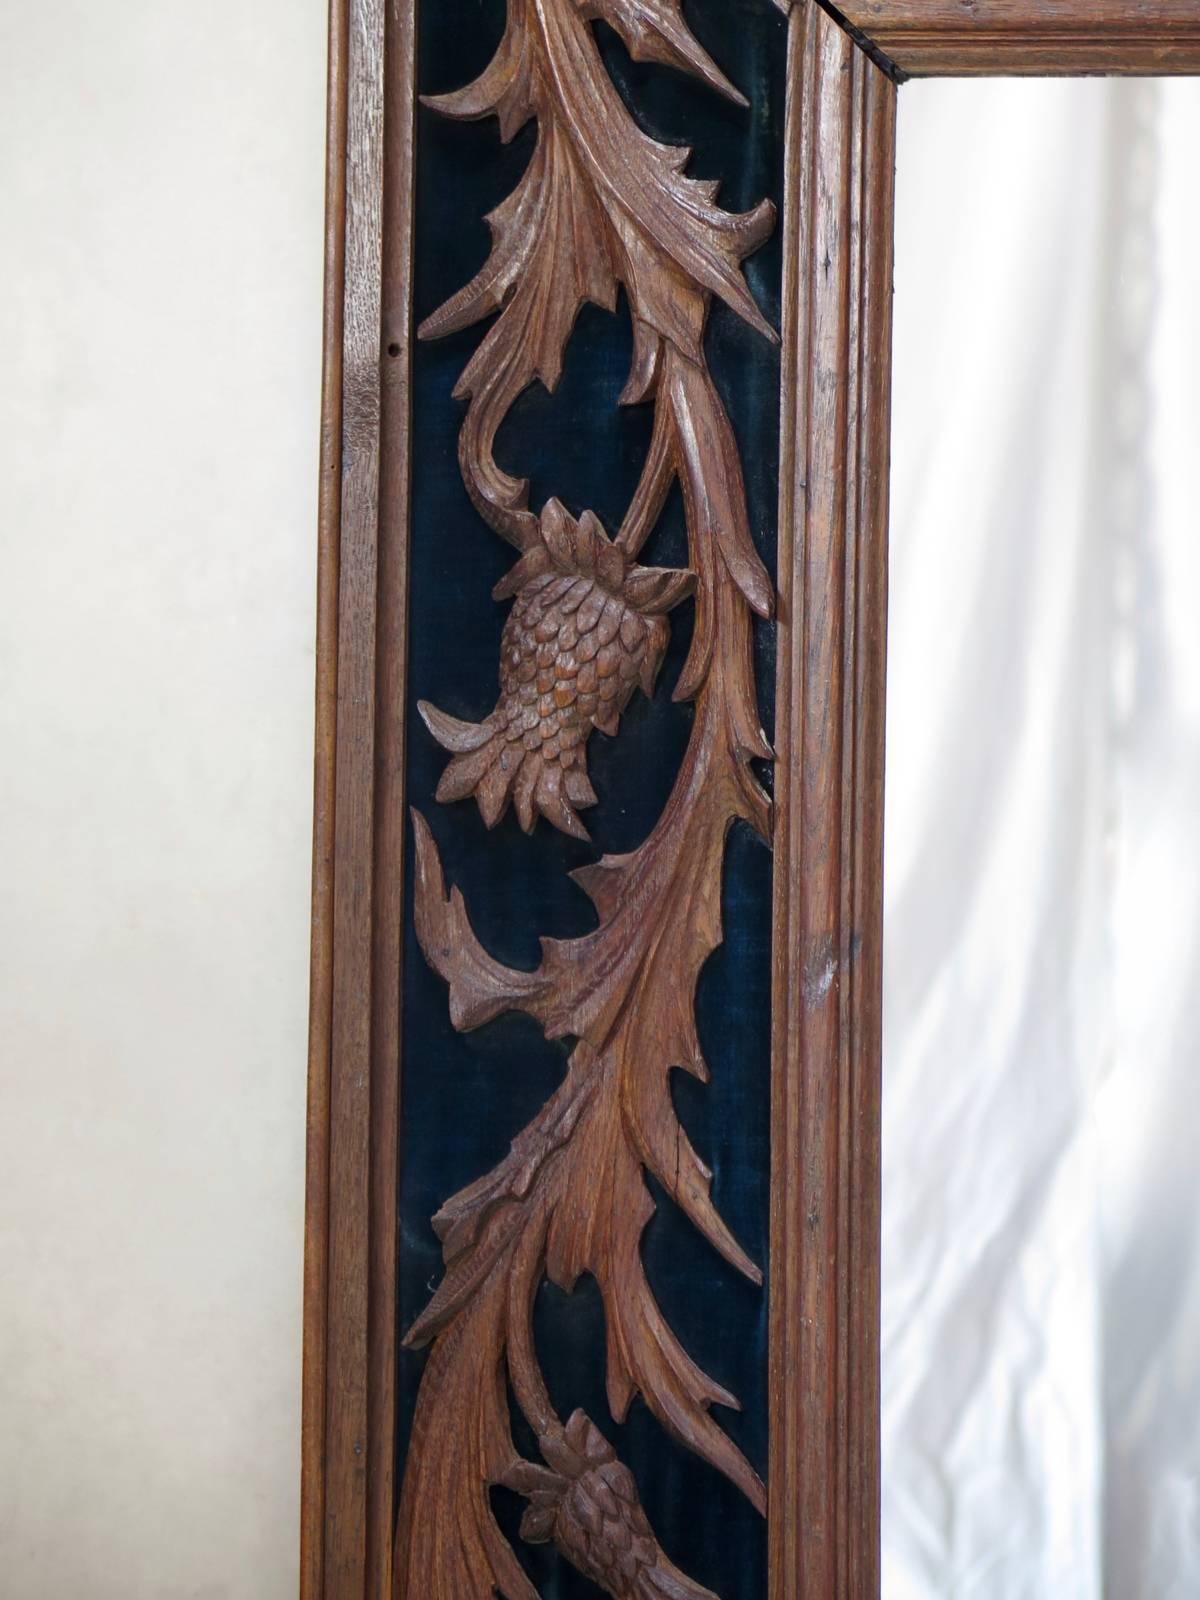 Large and gorgeous frame, with hand-carved thistles motifs applied to a deep teal blue velvet background. The wood is oak. New mirror.